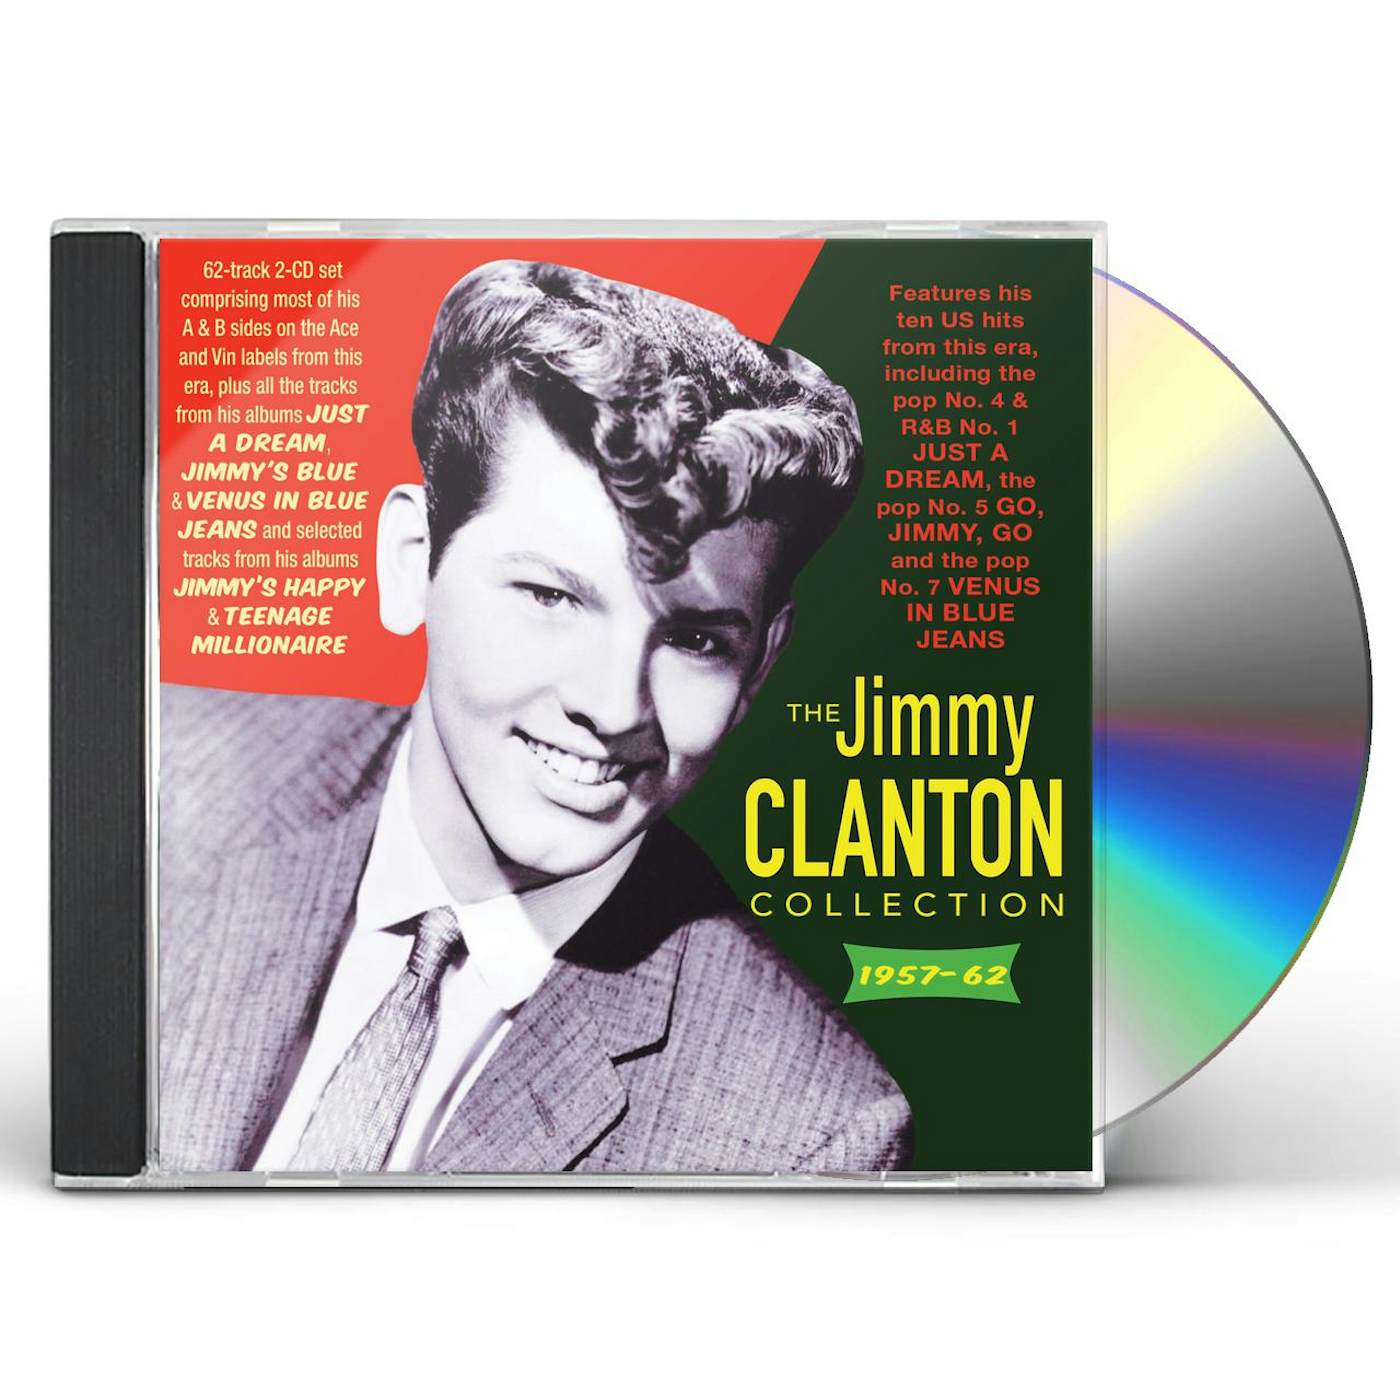 JIMMY CLANTON COLLECTION 1957-62 CD